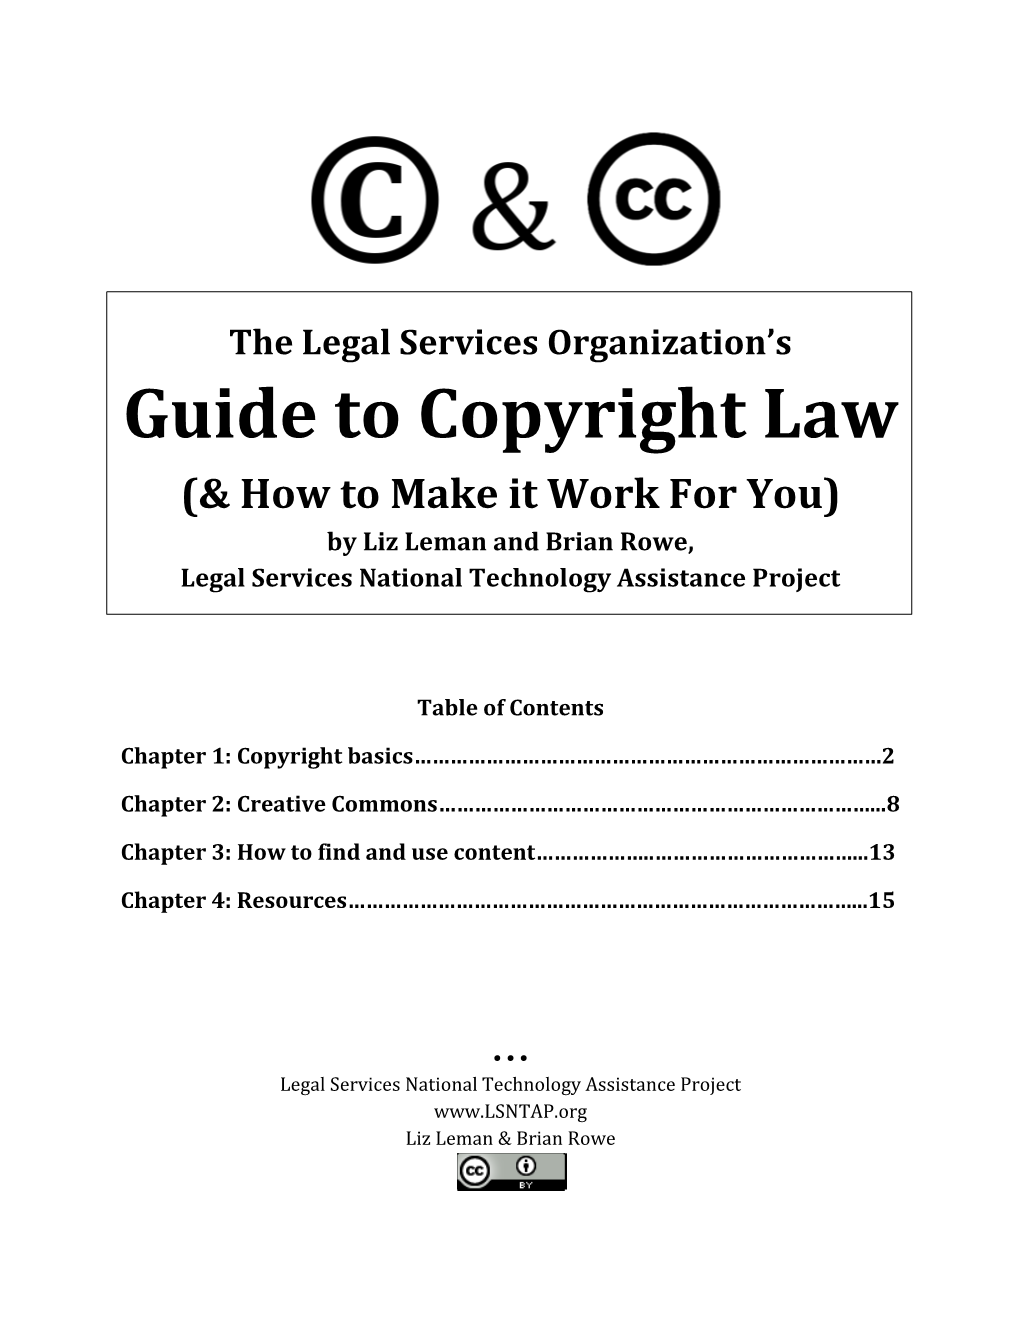 Guide to Copyright and CC for Legal Services.Pdf